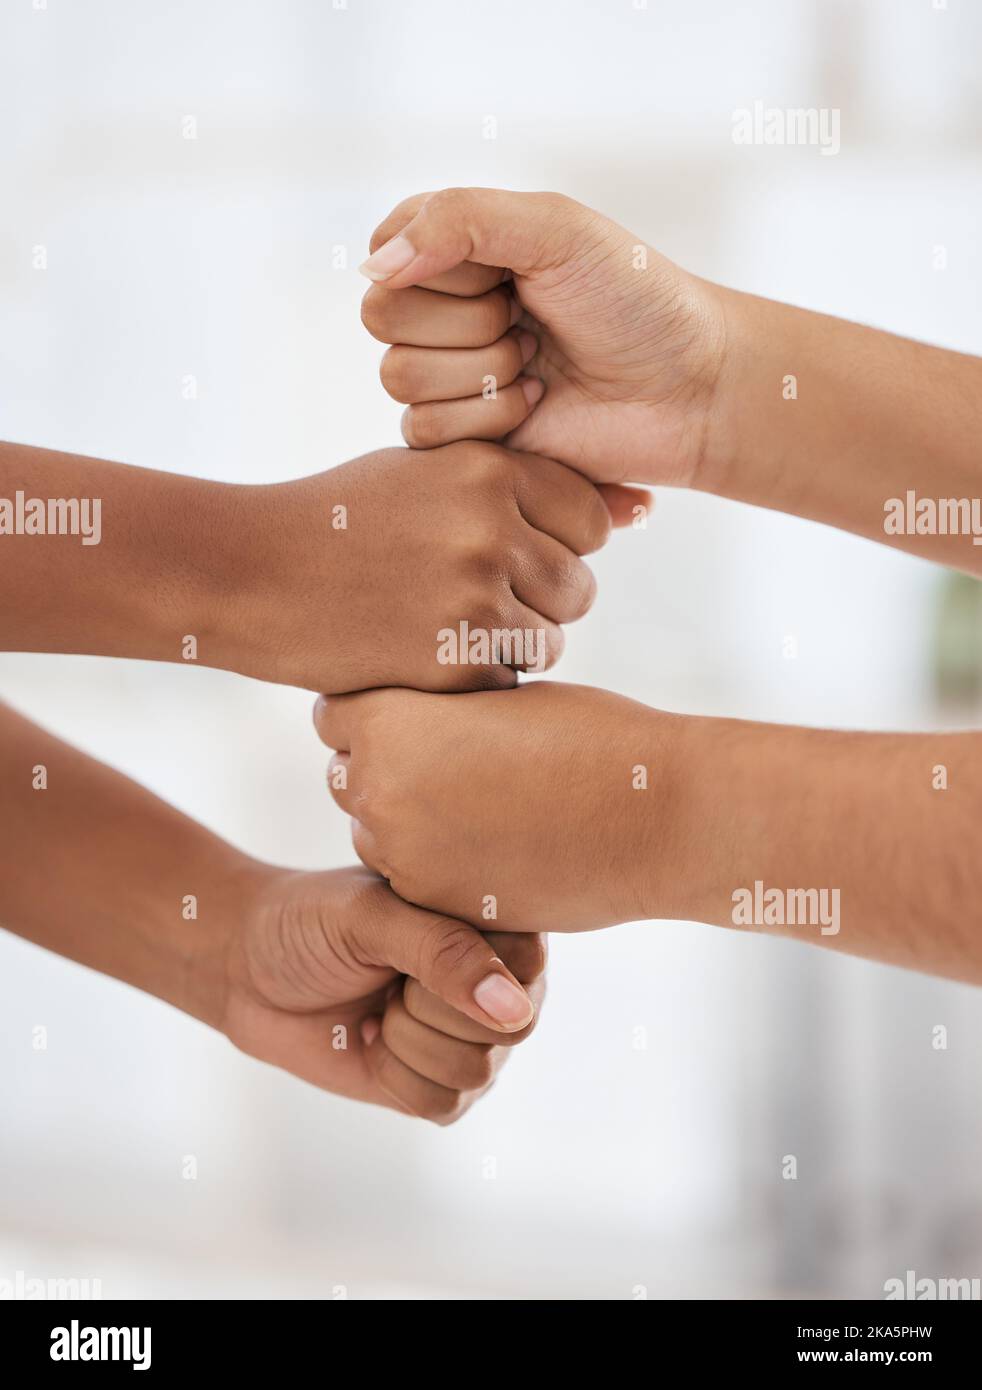 Team building, support and hands of business people with motivation, collaboration and community for work. Teamwork, success and fist of employees Stock Photo